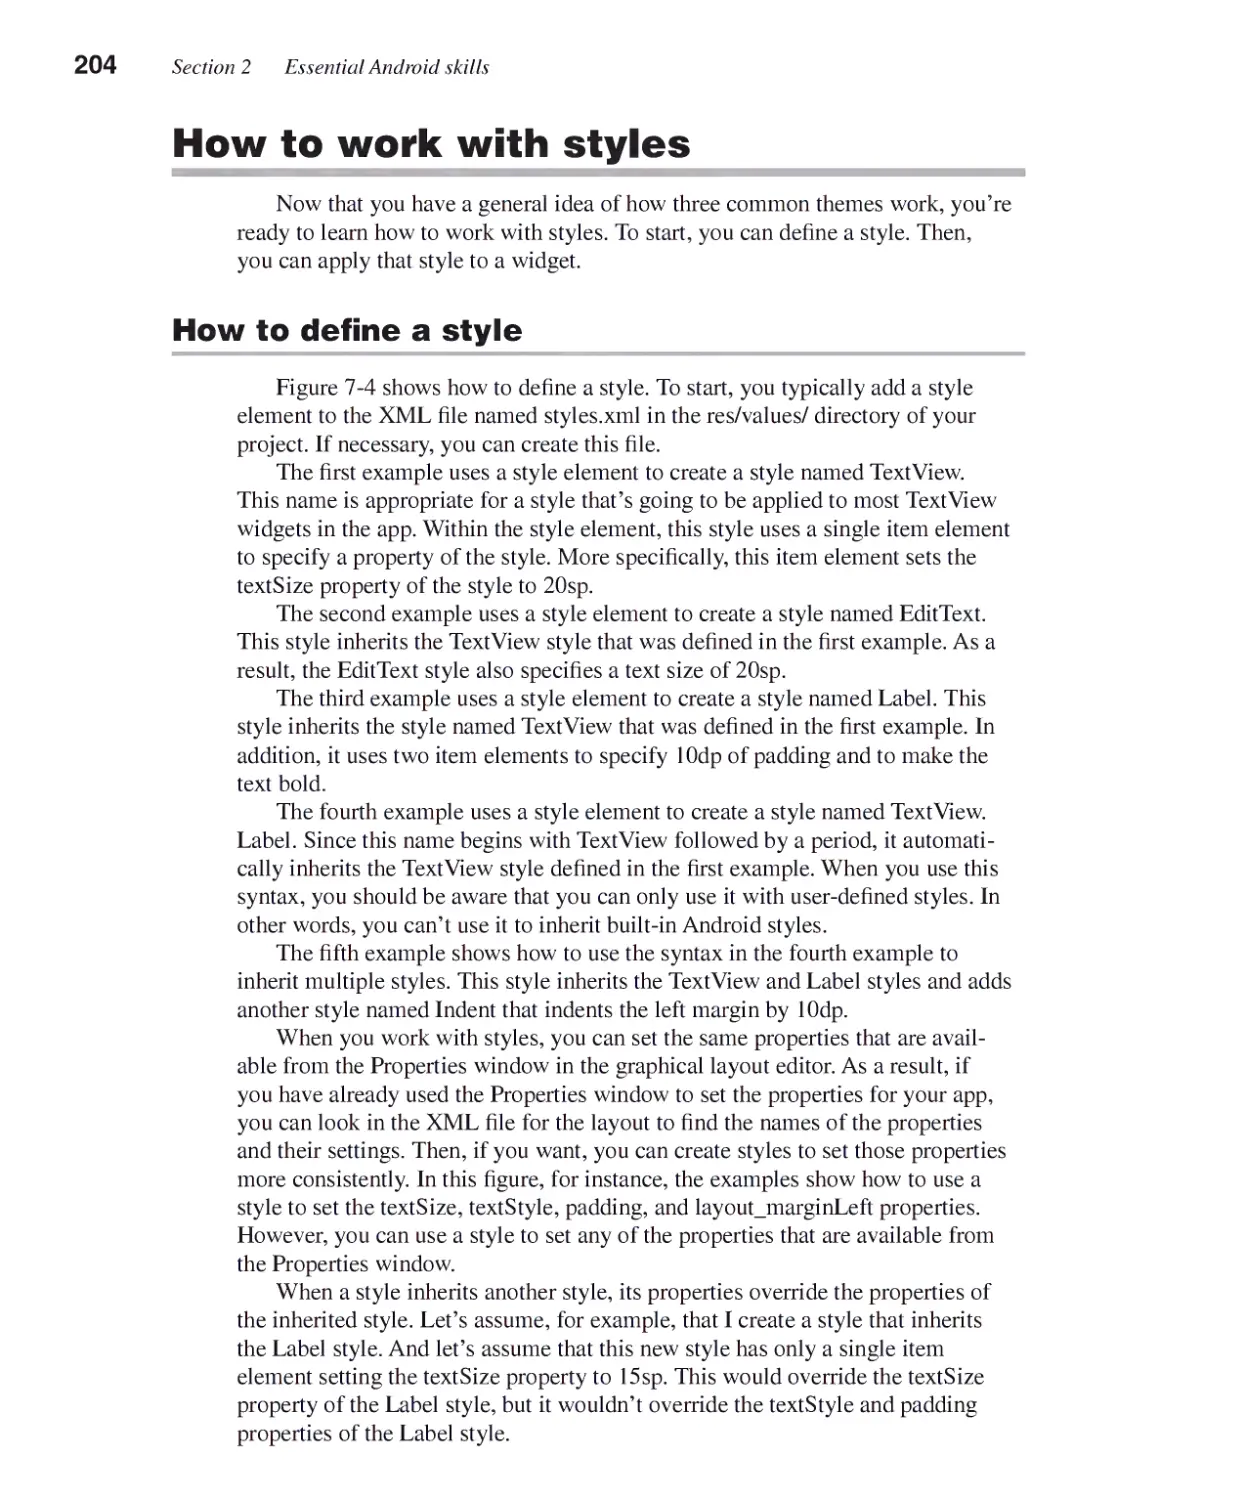 How to Work with Styles